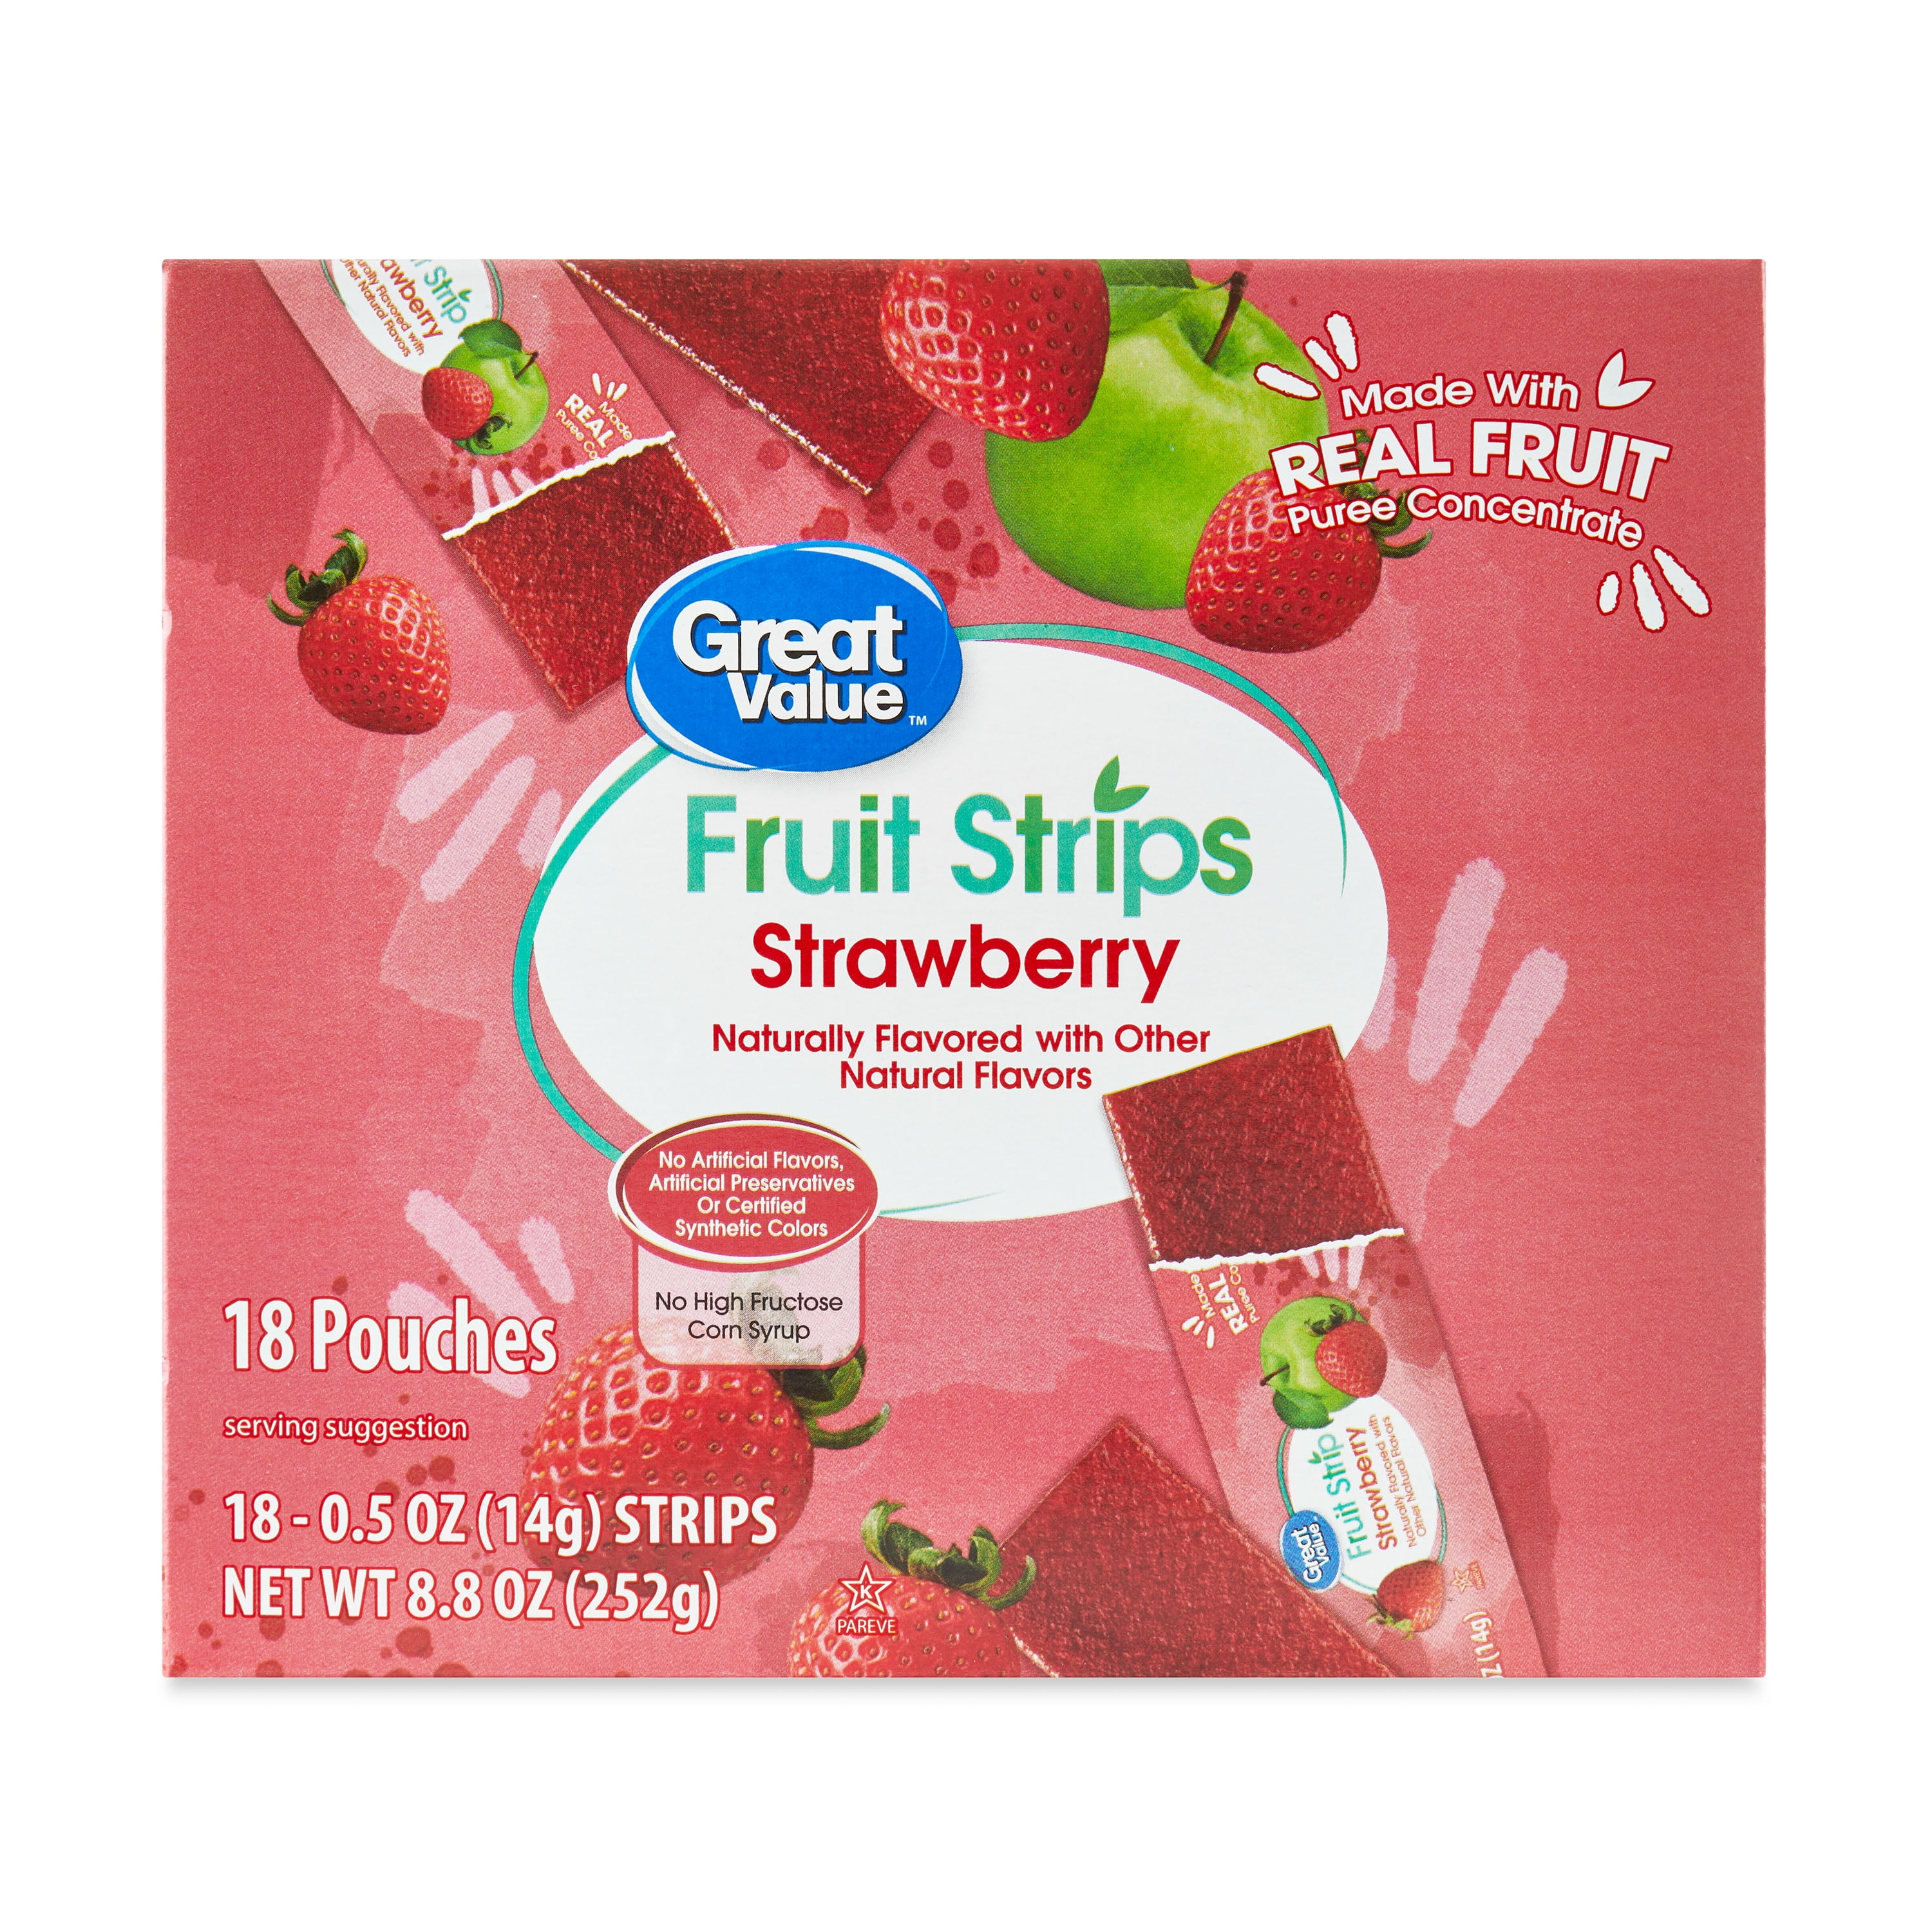 Organic Strawberry Fruit Strip 30 Count, 19 oz at Whole Foods Market